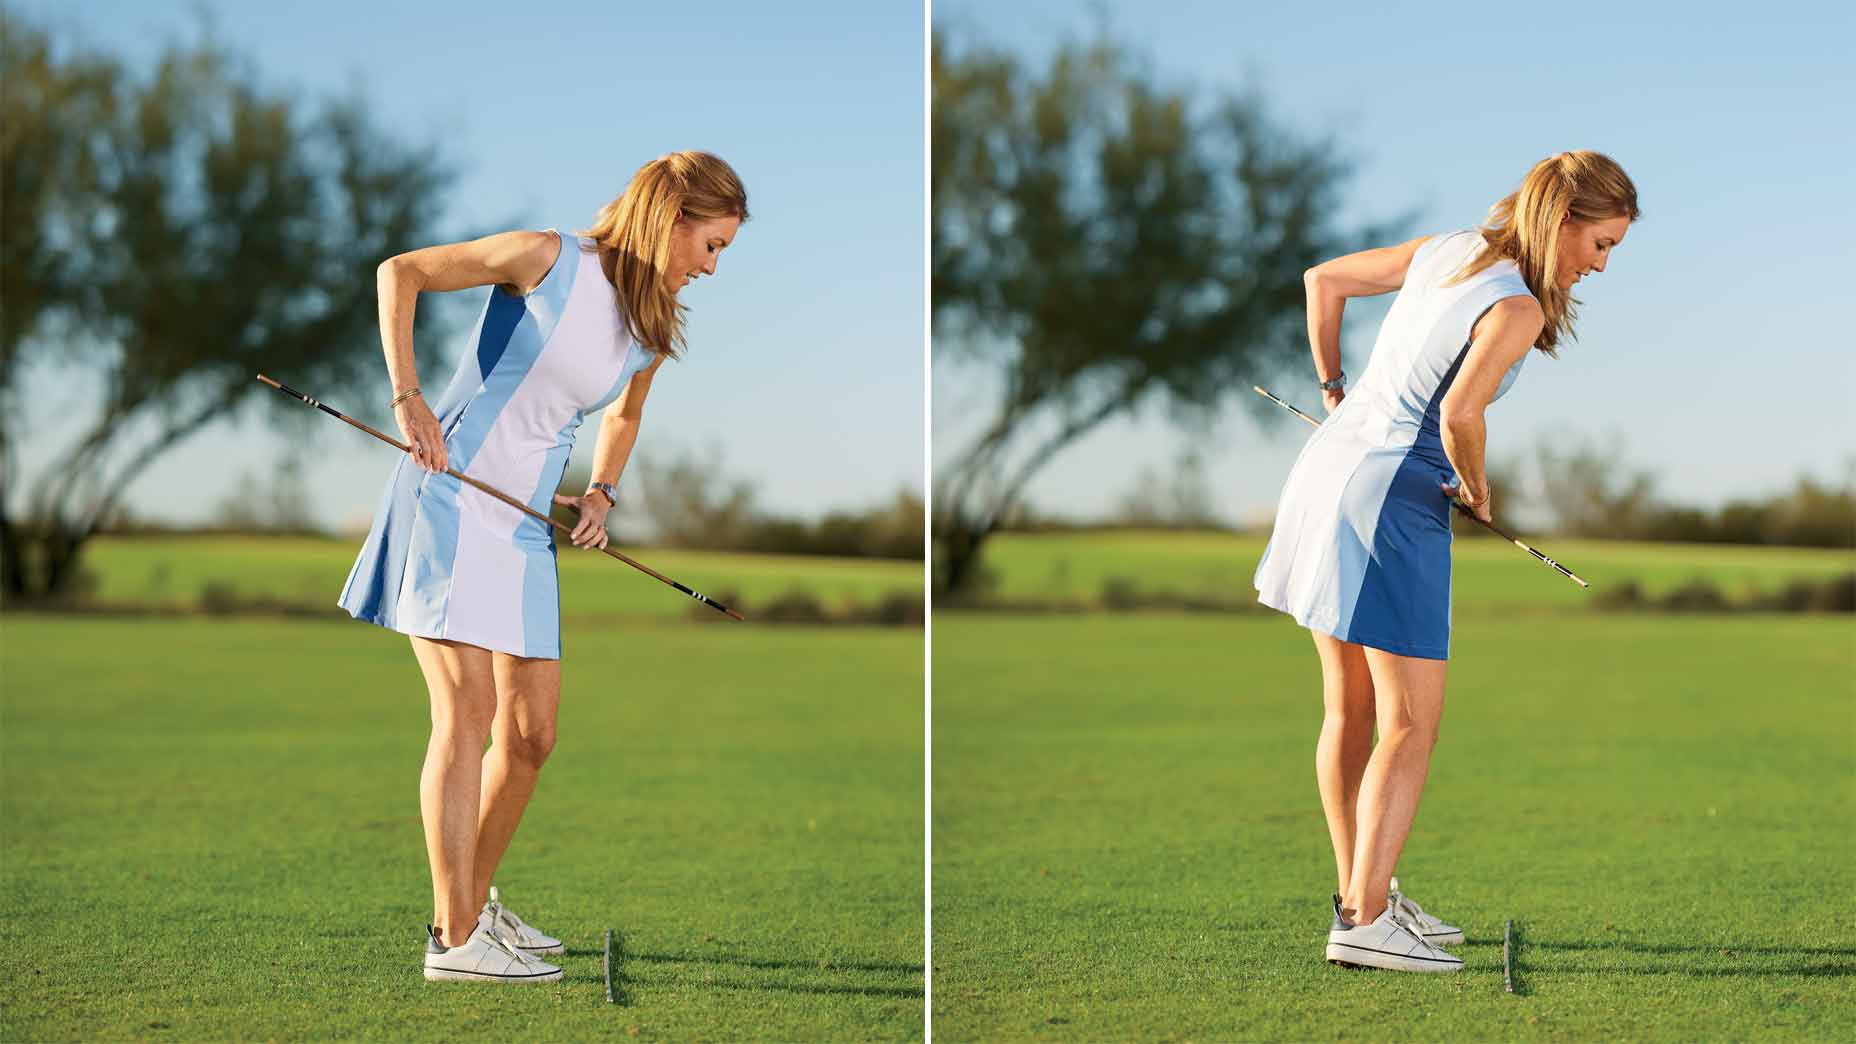 How to properly use your hips to generate power in your swing